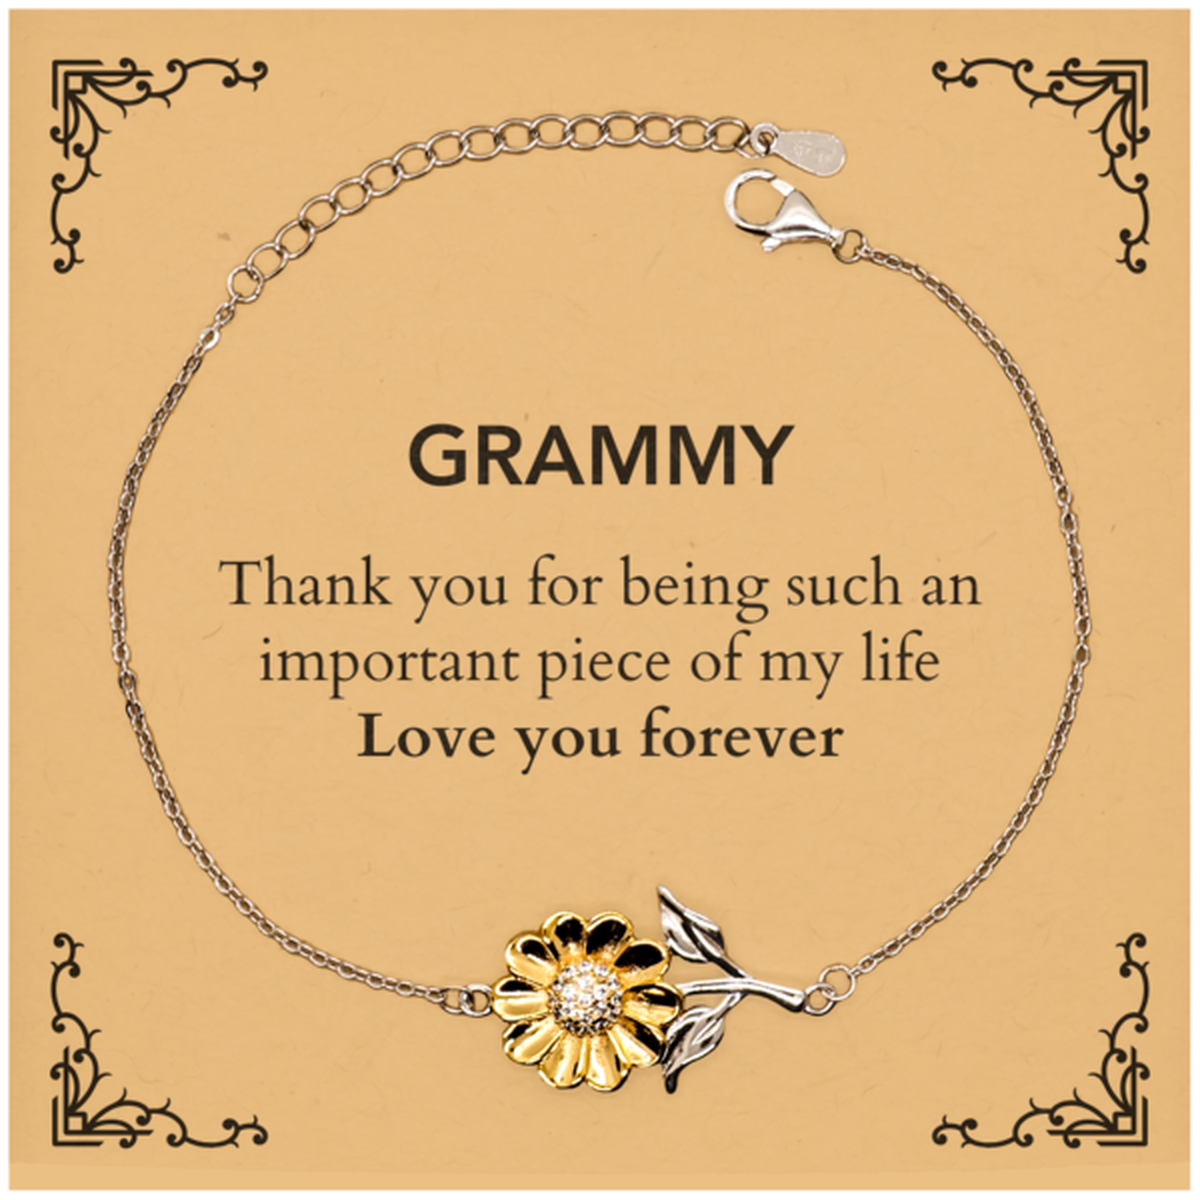 Appropriate Grammy Sunflower Bracelet Epic Birthday Gifts for Grammy Thank you for being such an important piece of my life Grammy Christmas Mothers Fathers Day